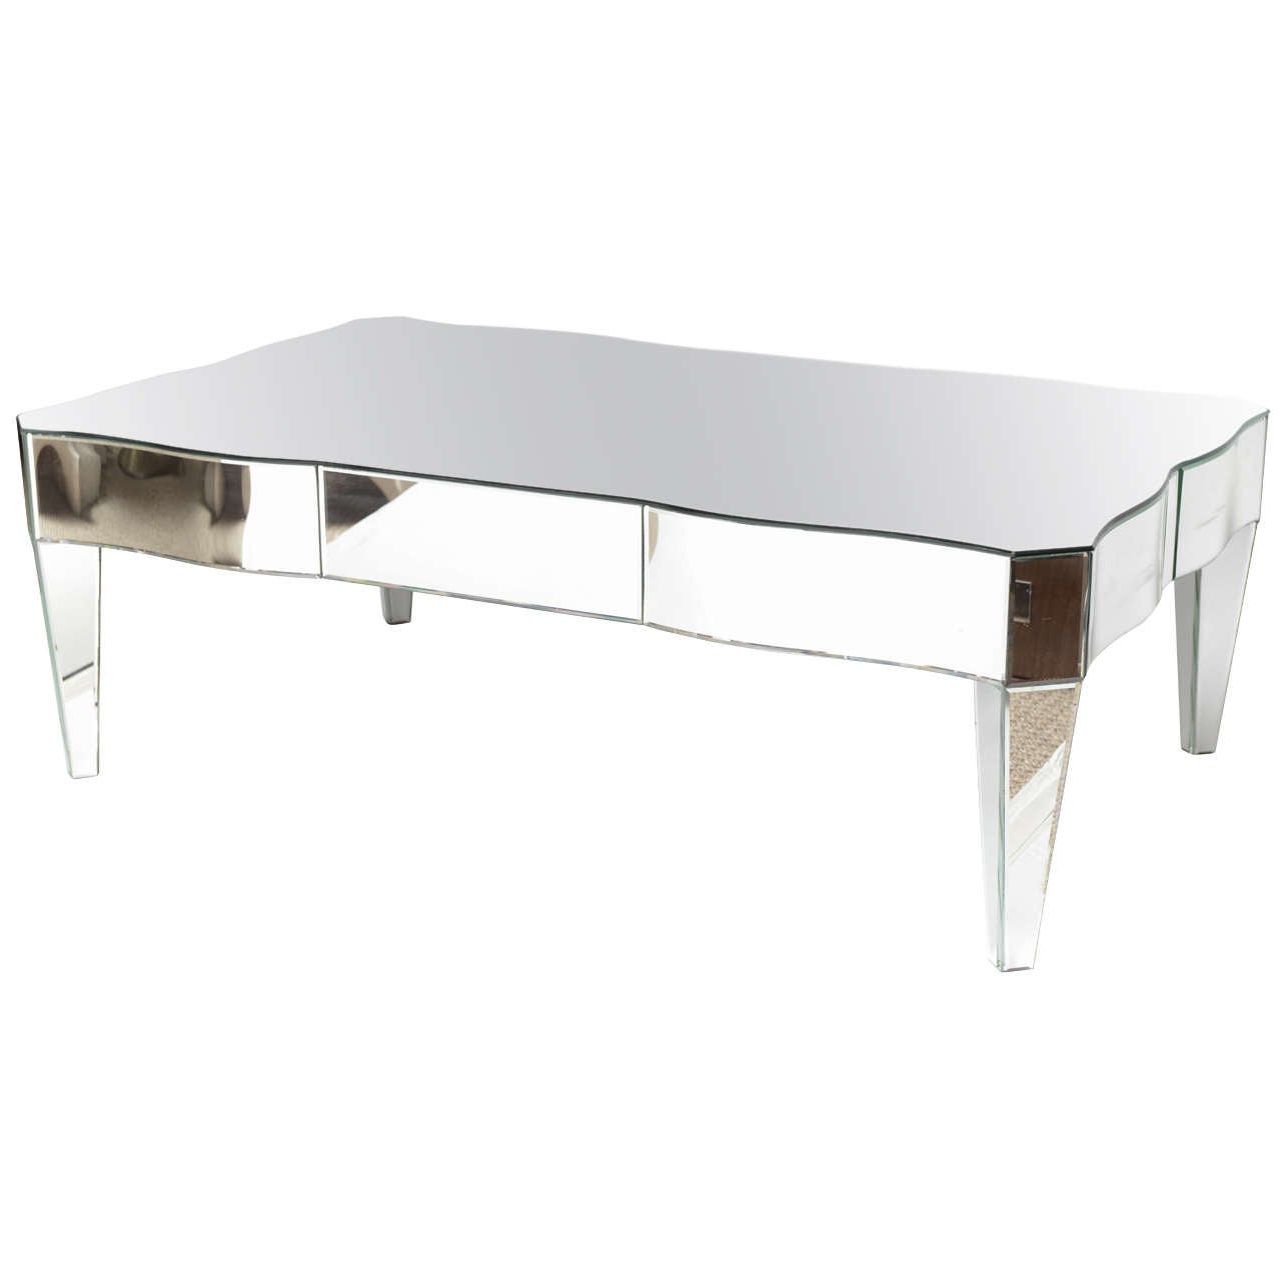 Favorite Mirrored Cocktail Tables Pertaining To Hollywood Regency Style Mirrored Cocktail Table At 1stdibs (View 5 of 20)